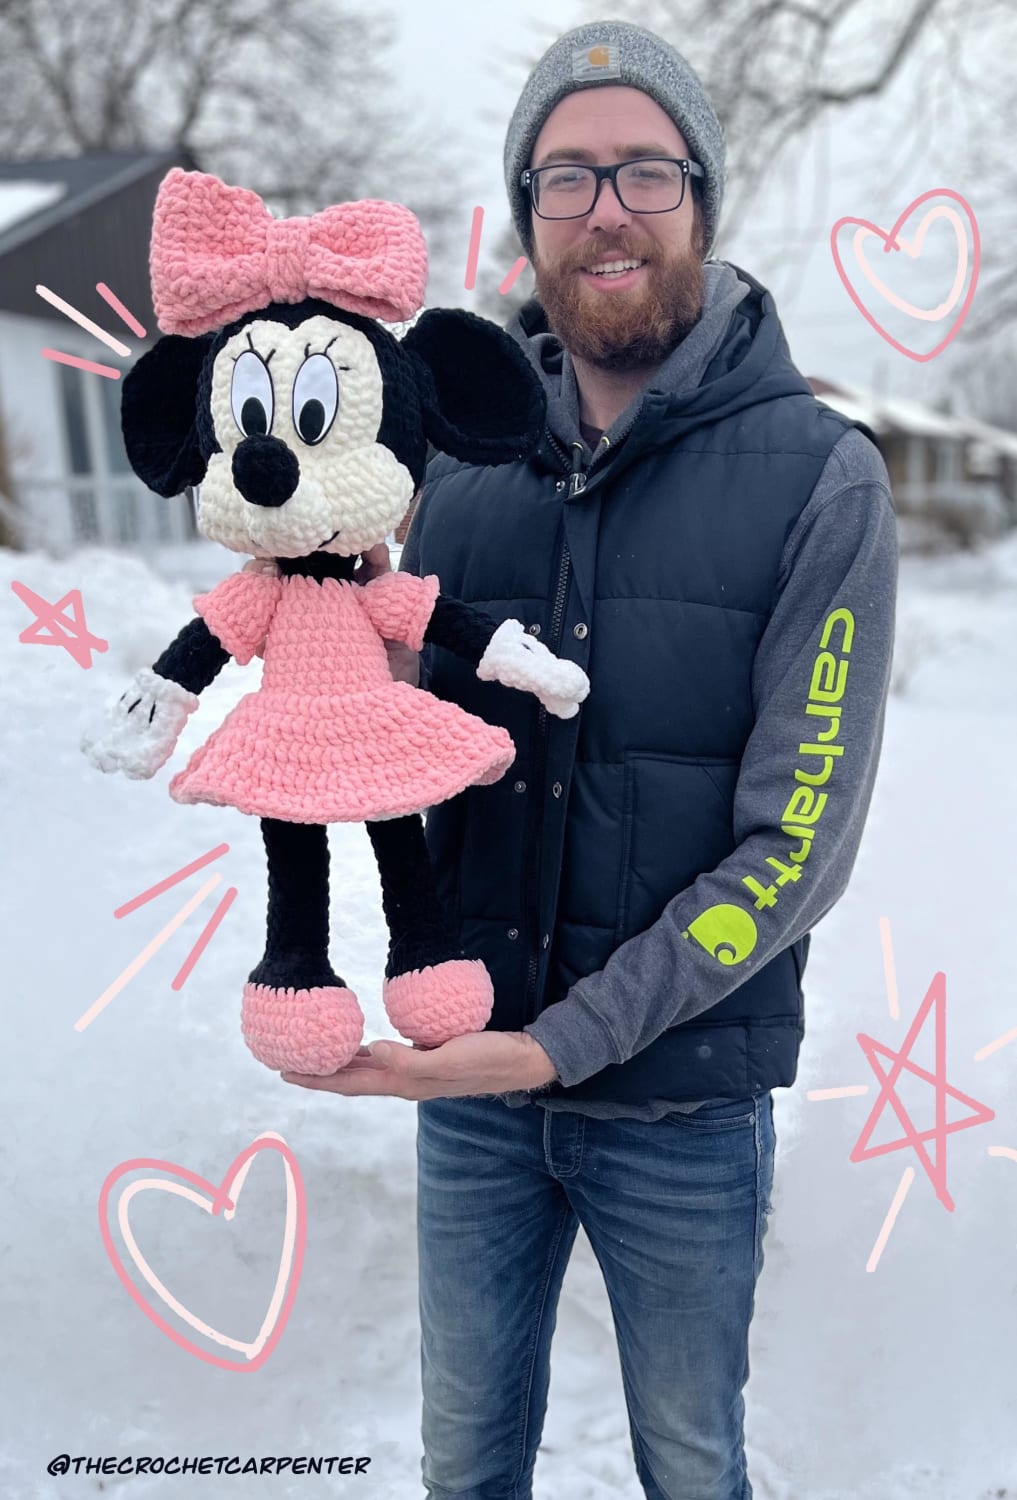 I Crocheted Minnie Mouse!